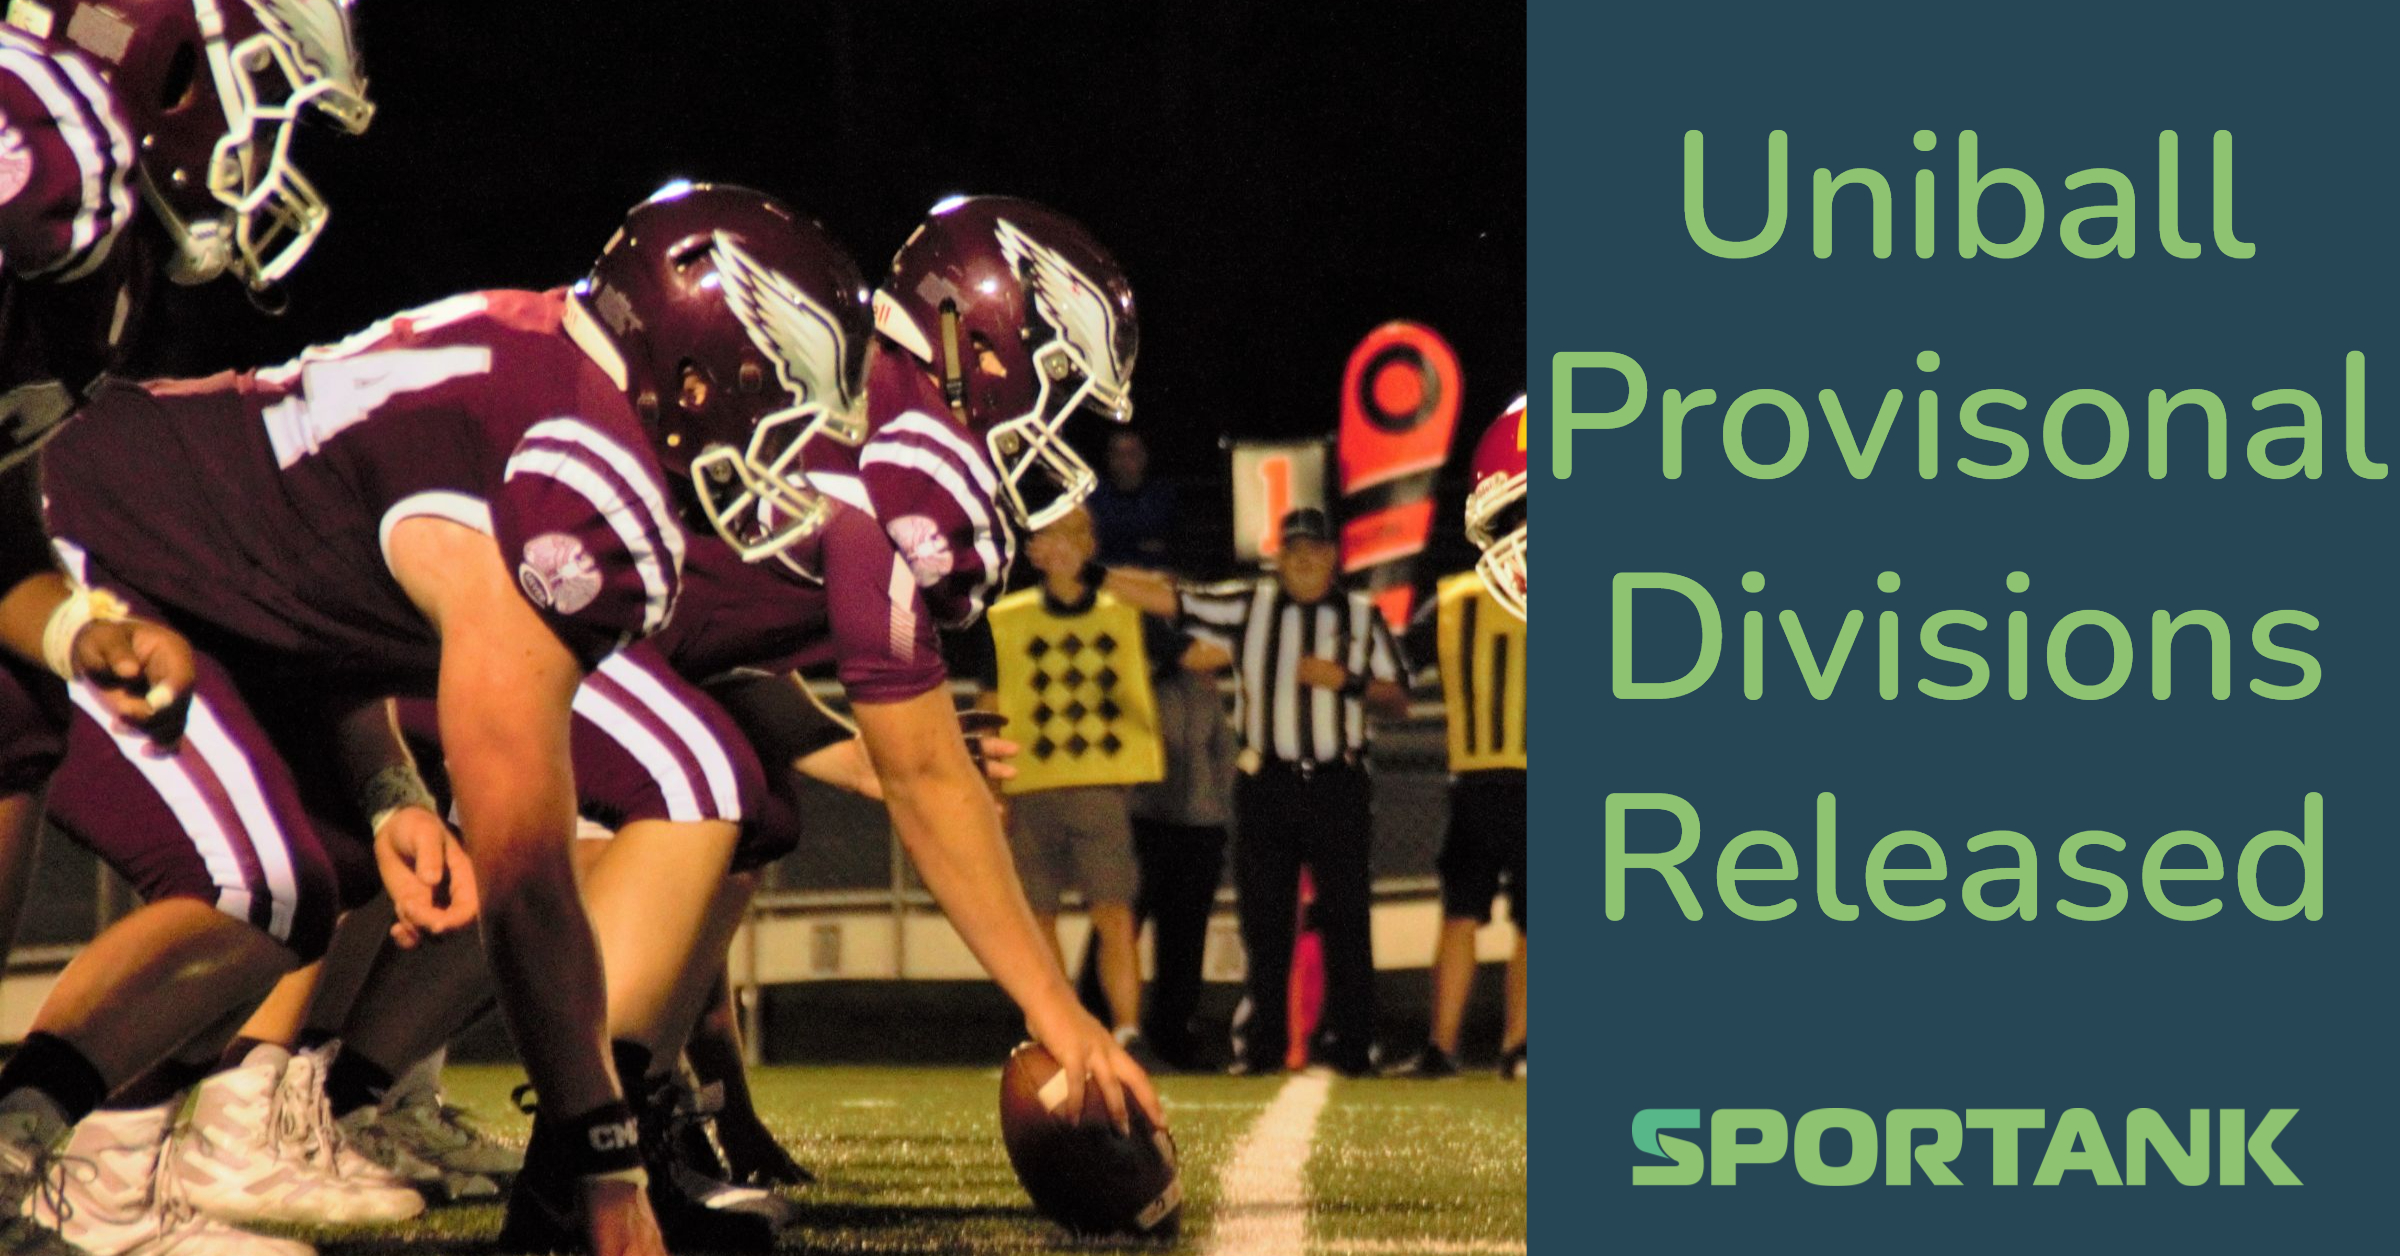 Uniball Provisional Alignments Released